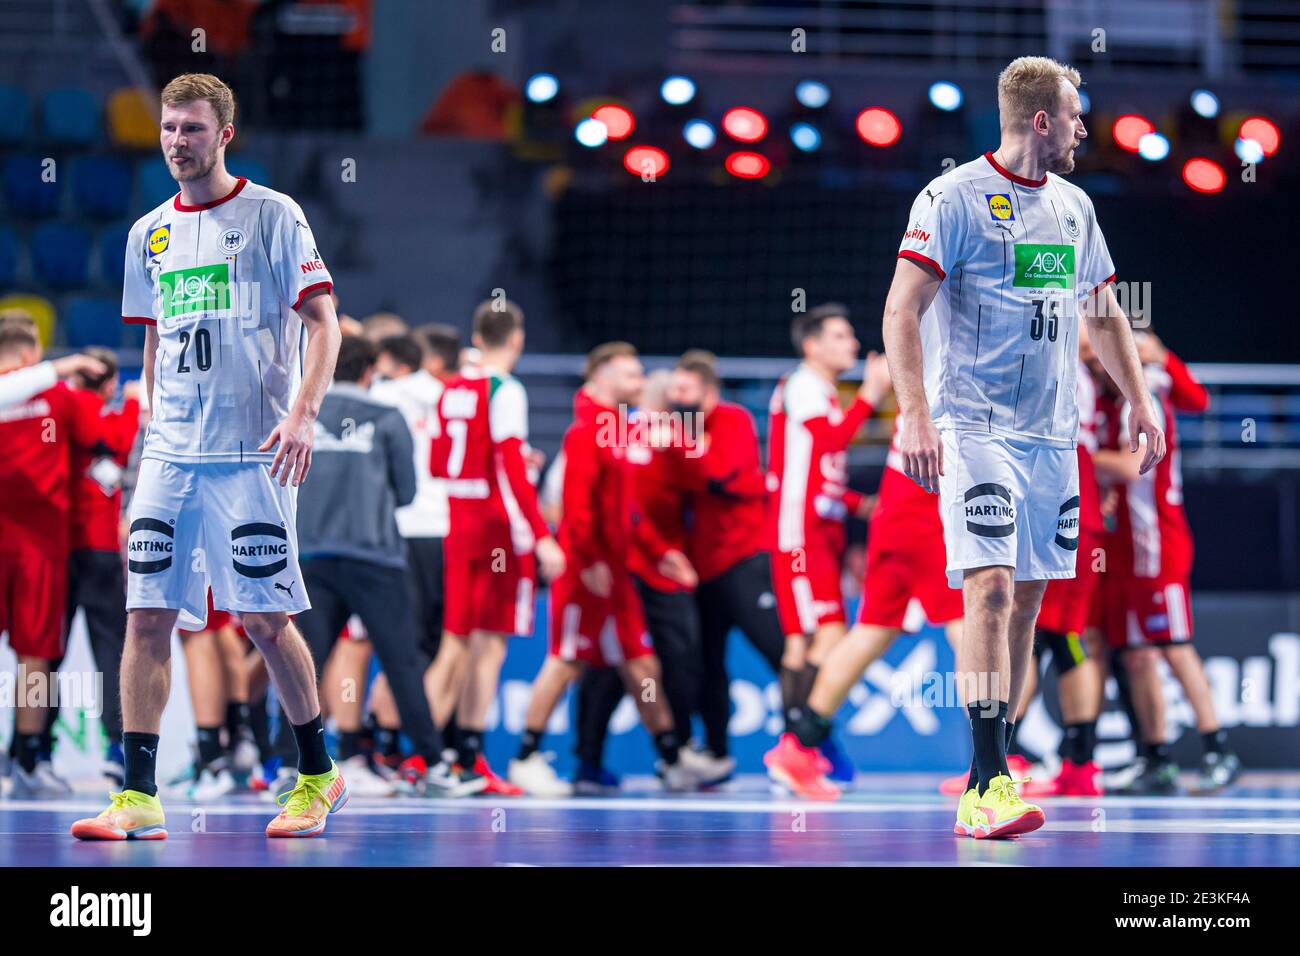 Madinat Sittah Uktubar, Egypt. 19th Jan, 2021. Handball: World Cup, Germany - Hungary, Preliminary Round, Group A, Matchday 3. Germany's Philipp Weber (l) and Julius Kühn (r) turn away disappointed while the Hungarian team celebrates. Credit: Sascha Klahn/dpa/Alamy Live News Stock Photo